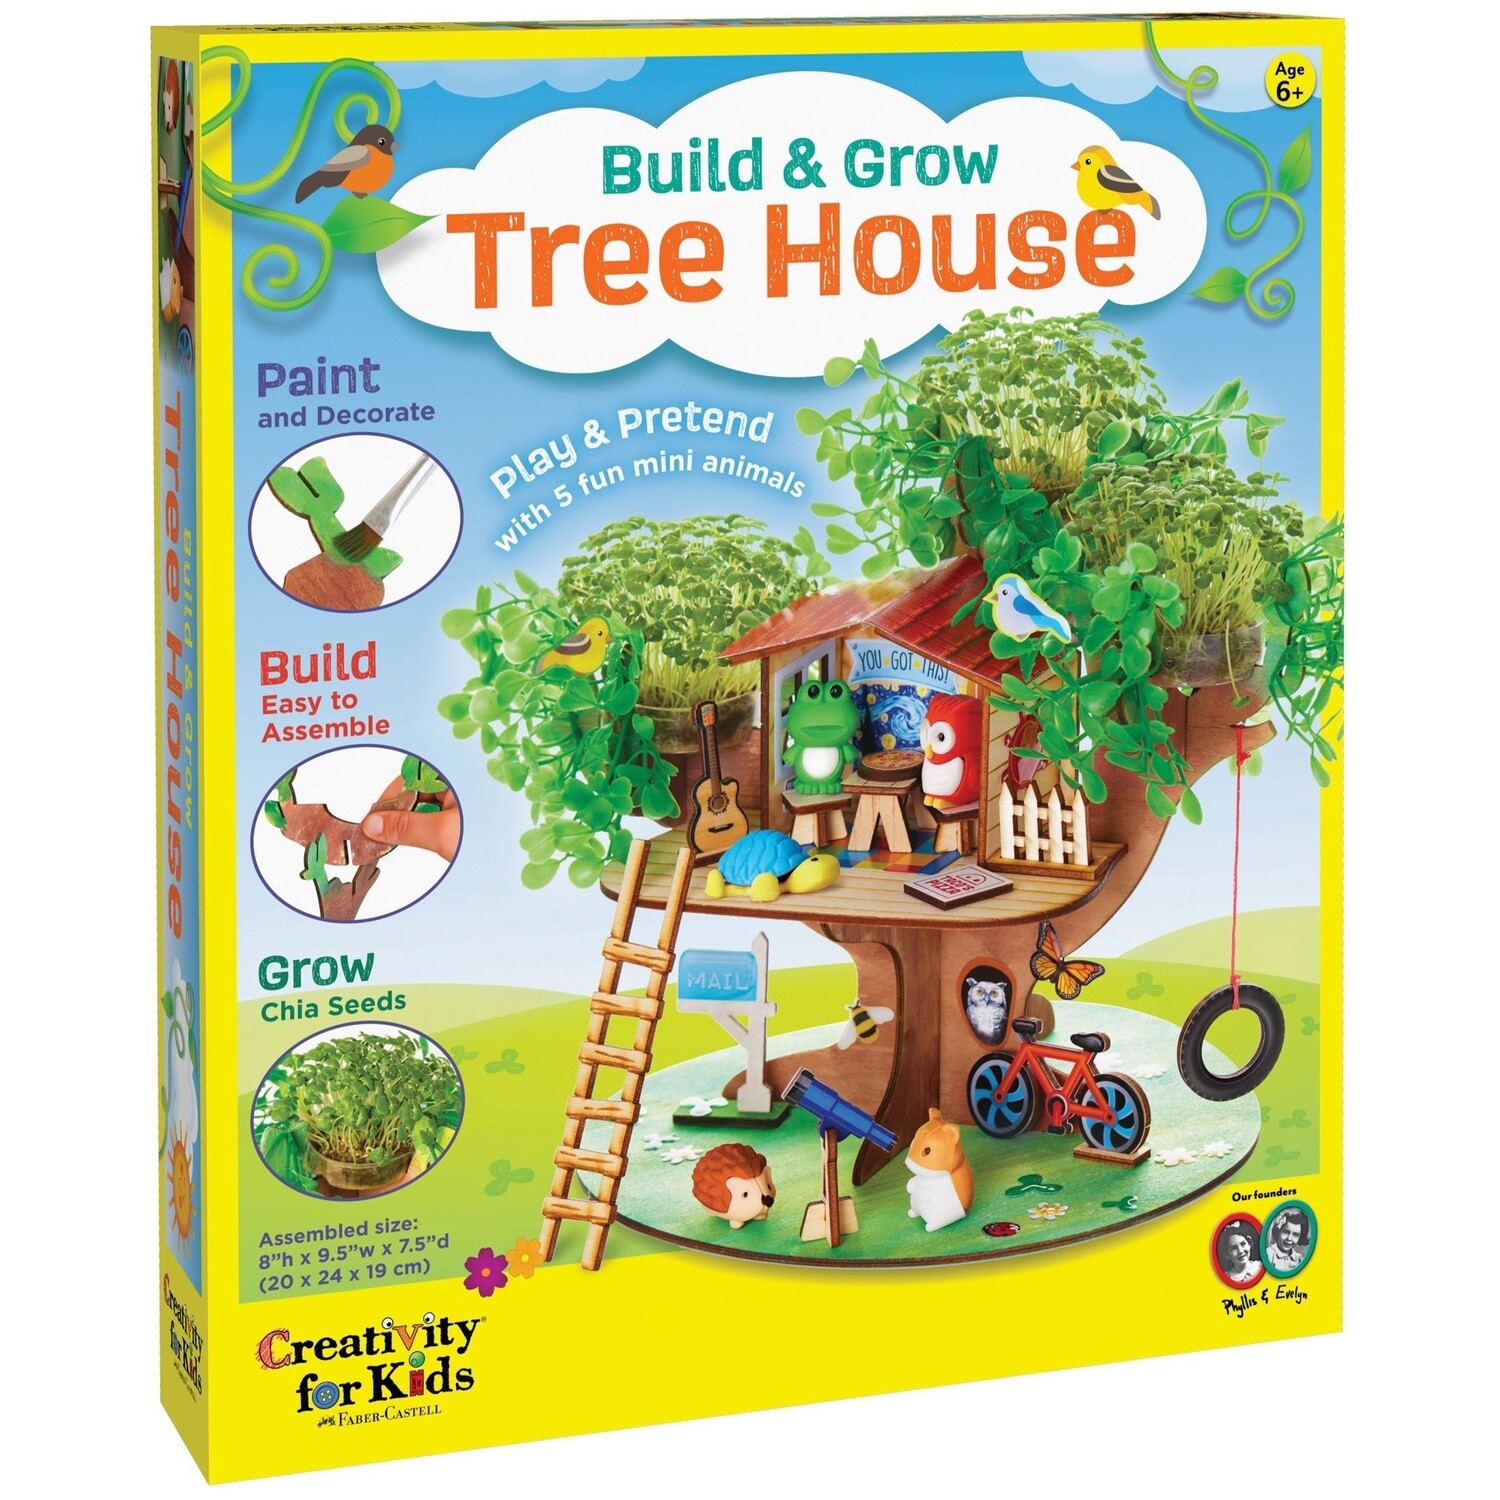 Faber-Castell Build & Grow Tree House